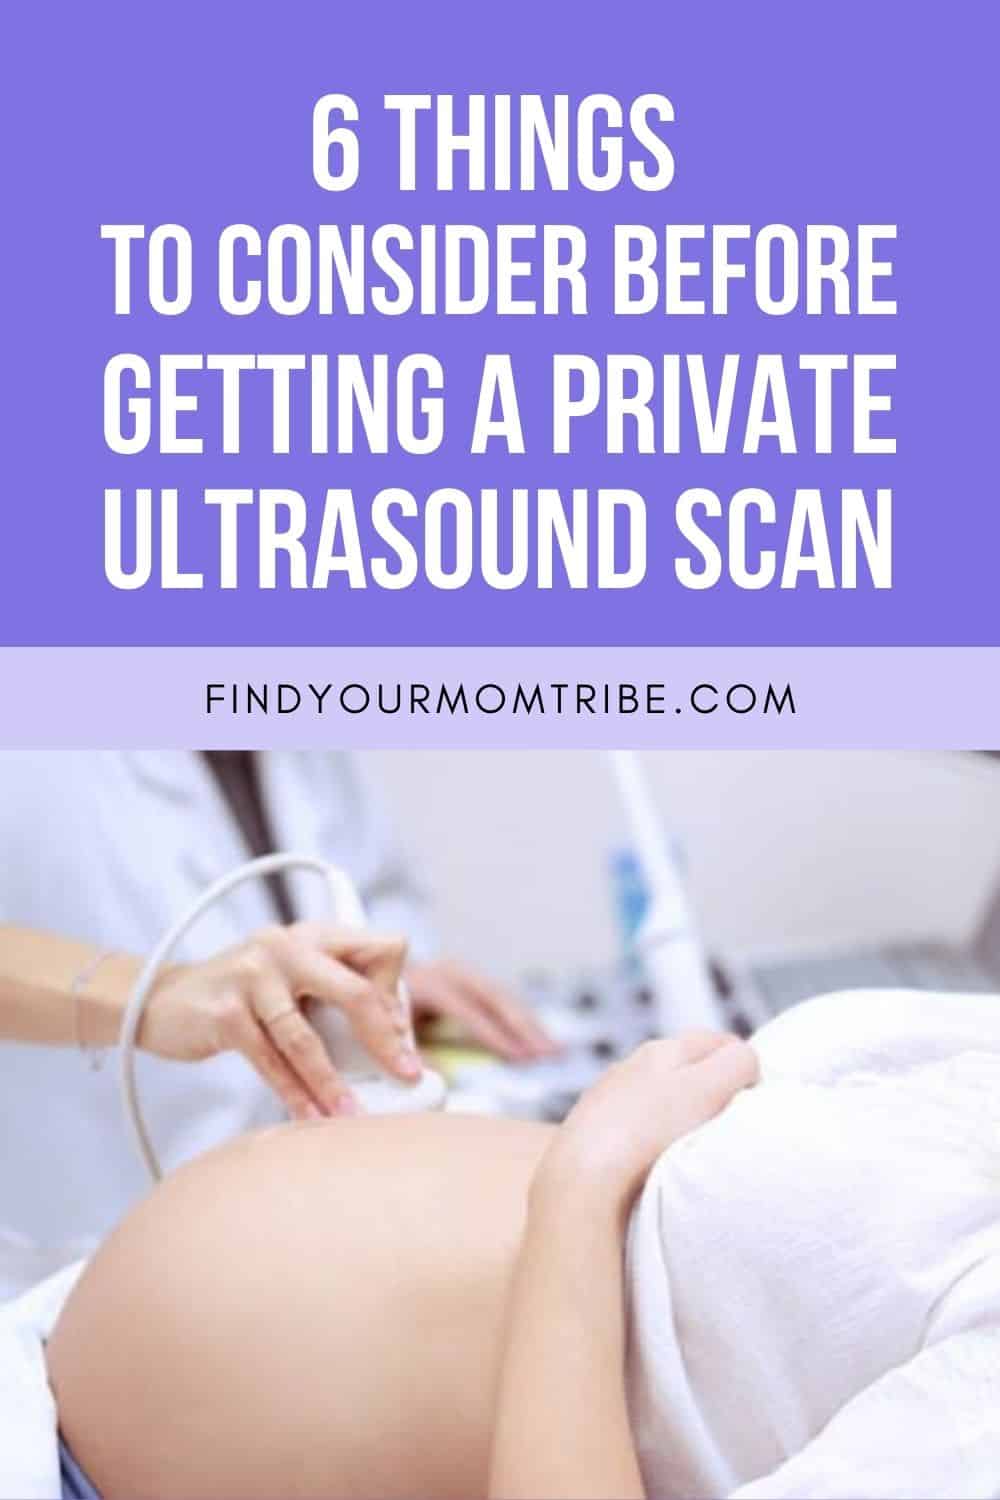 6 Things To Consider Before Getting A Private Ultrasound Scan Pinterest